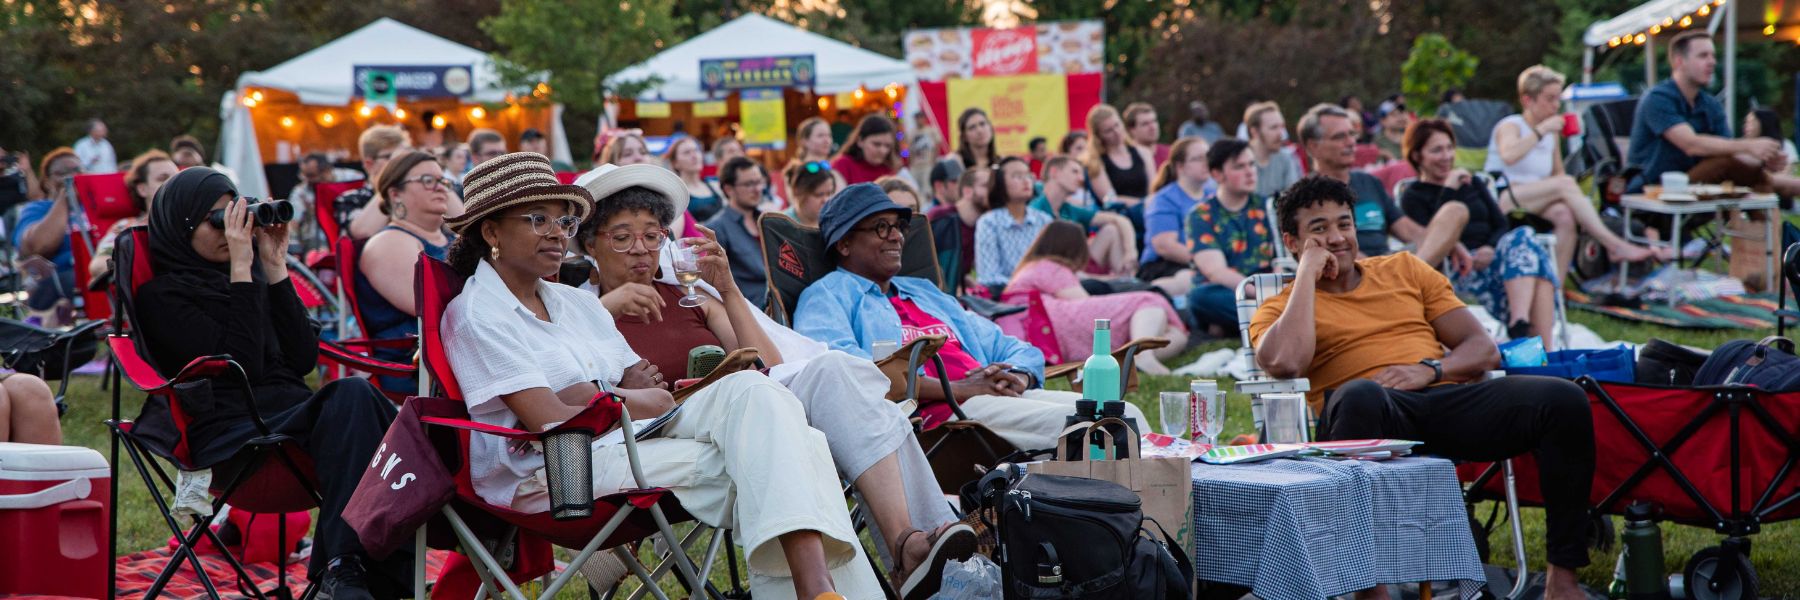 A diverse audience watches a performance during the St. Louis Shakespeare Festival.